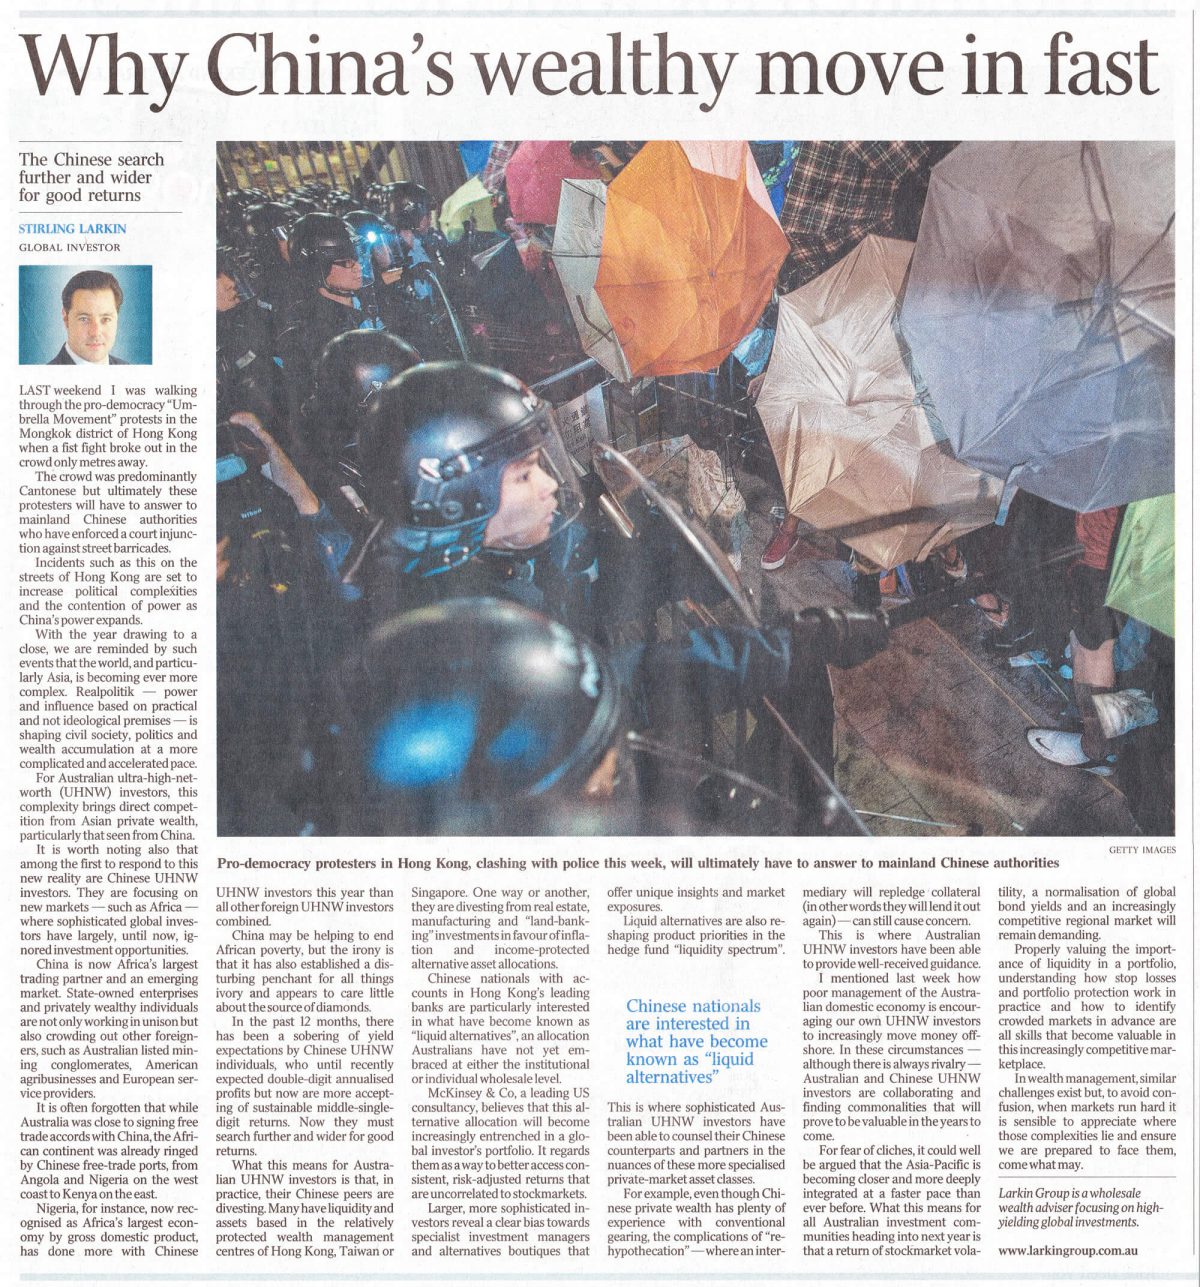 australian standfirst discusses Cchines markets in 2014 in the australian newspaper